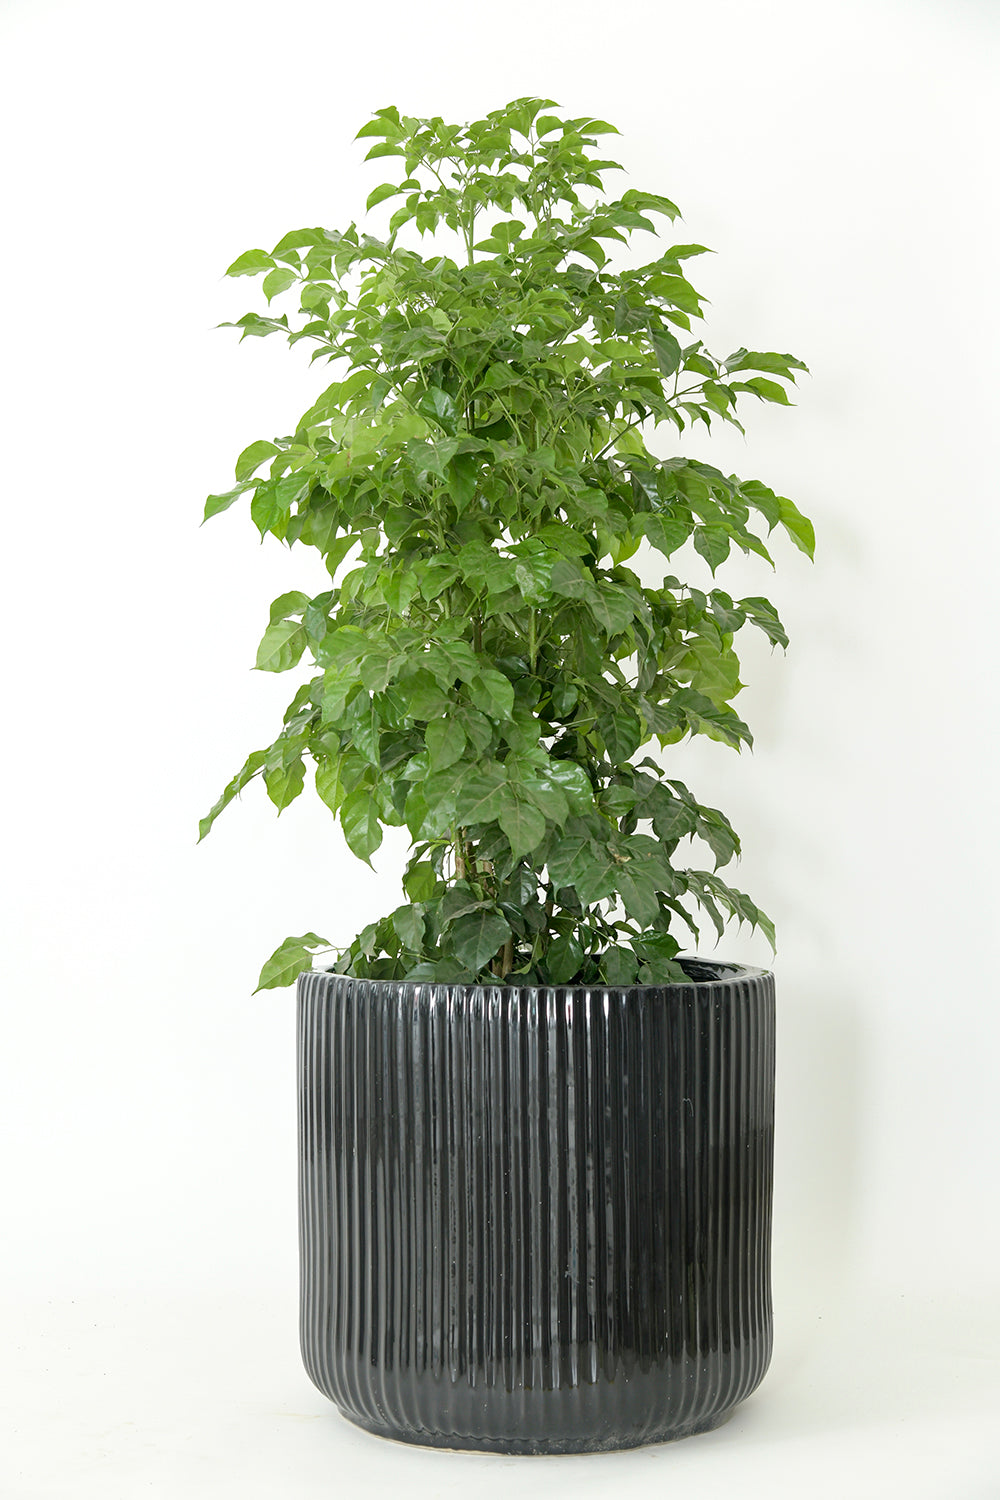 Extra size Pheonix ceramic planter in Black color with Ficus plant in it.